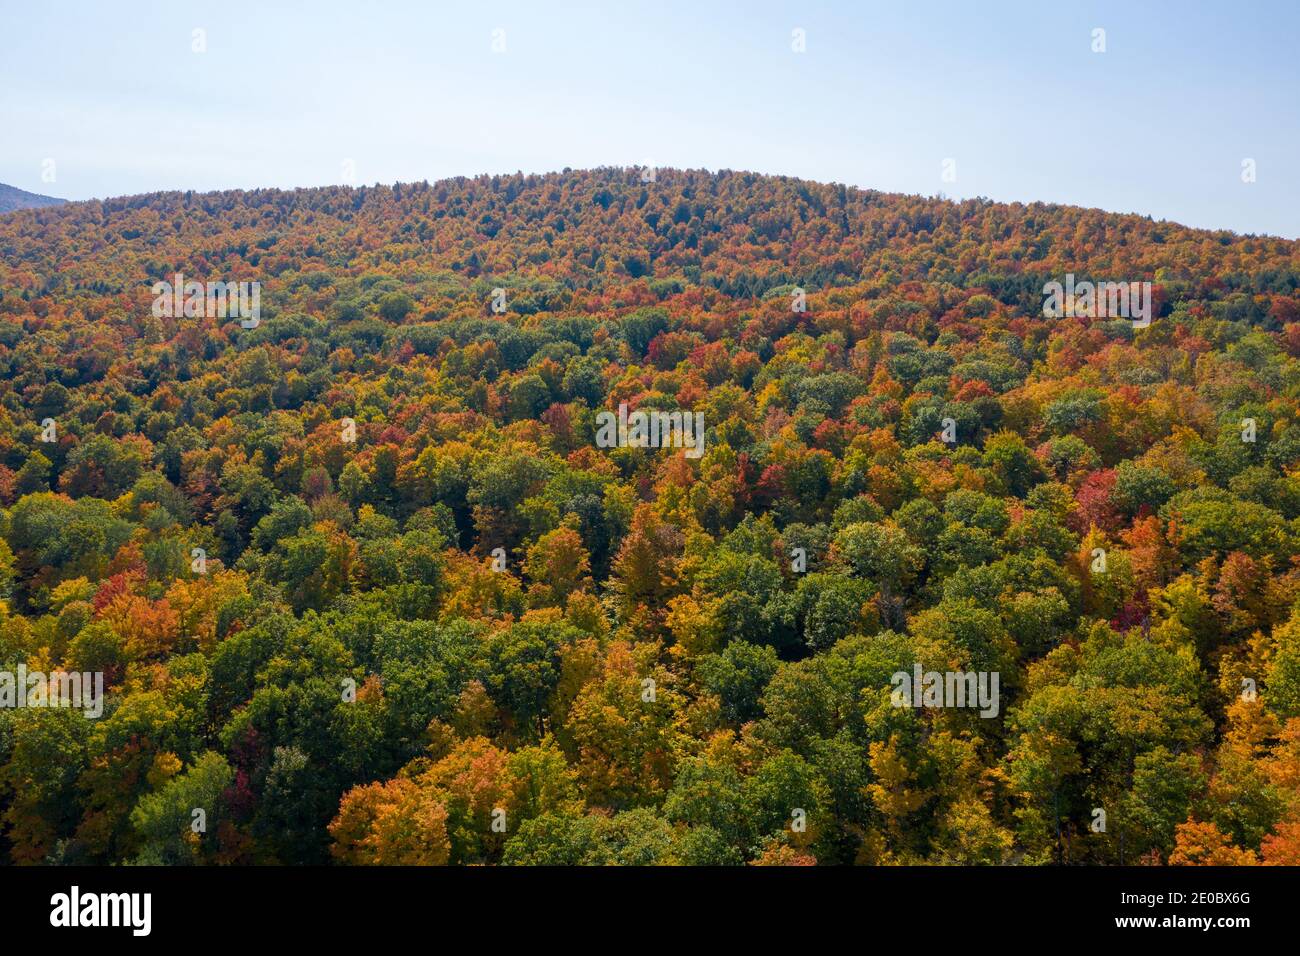 Aerial view of fall foliage along the Catskill Mountains in upstate New